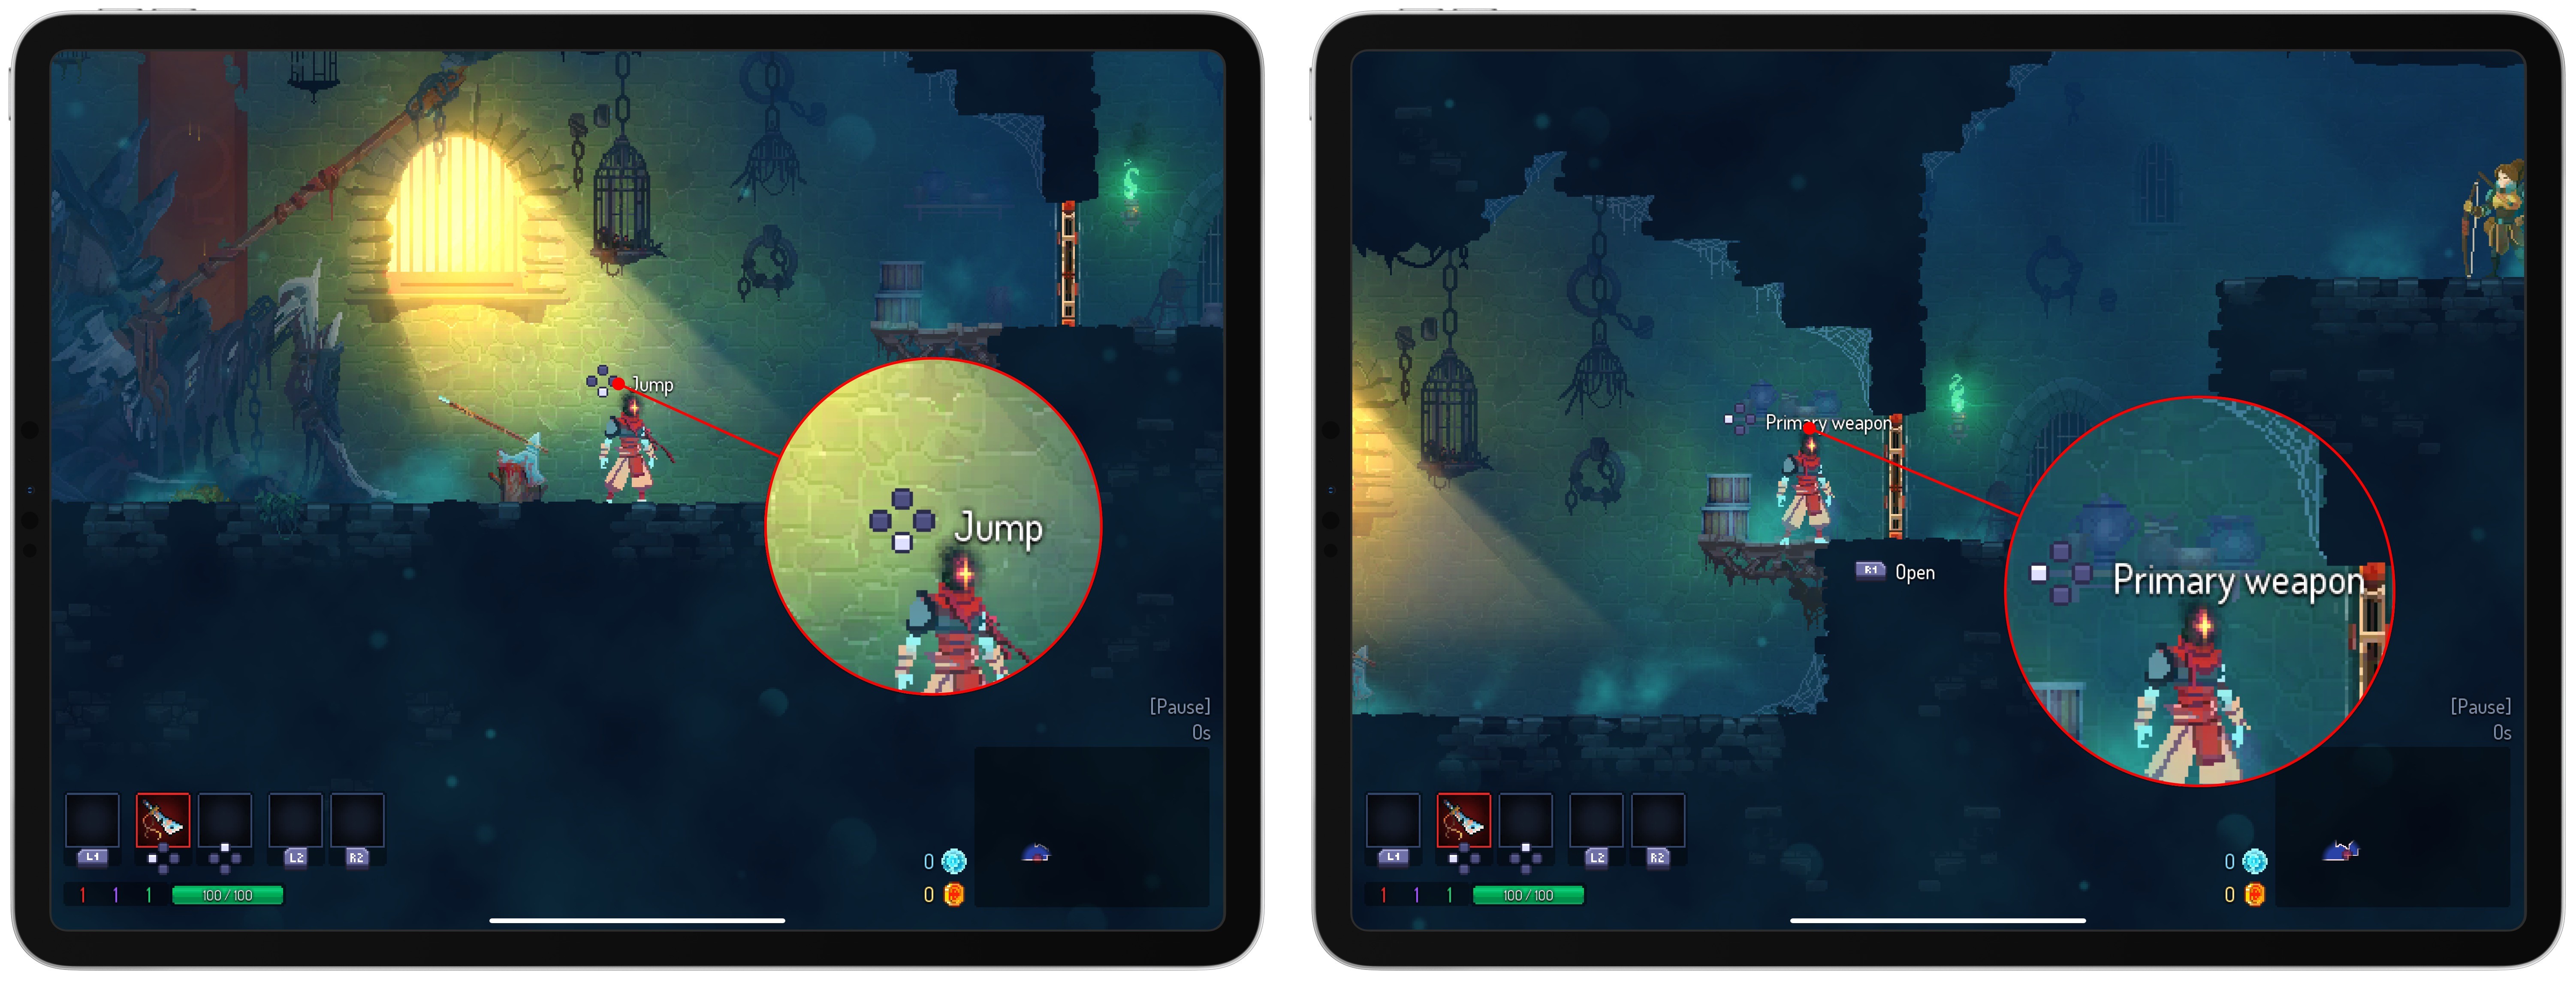 Dead Cells is a good example of a game that uses generic positional mapping of controls for in-game hints.